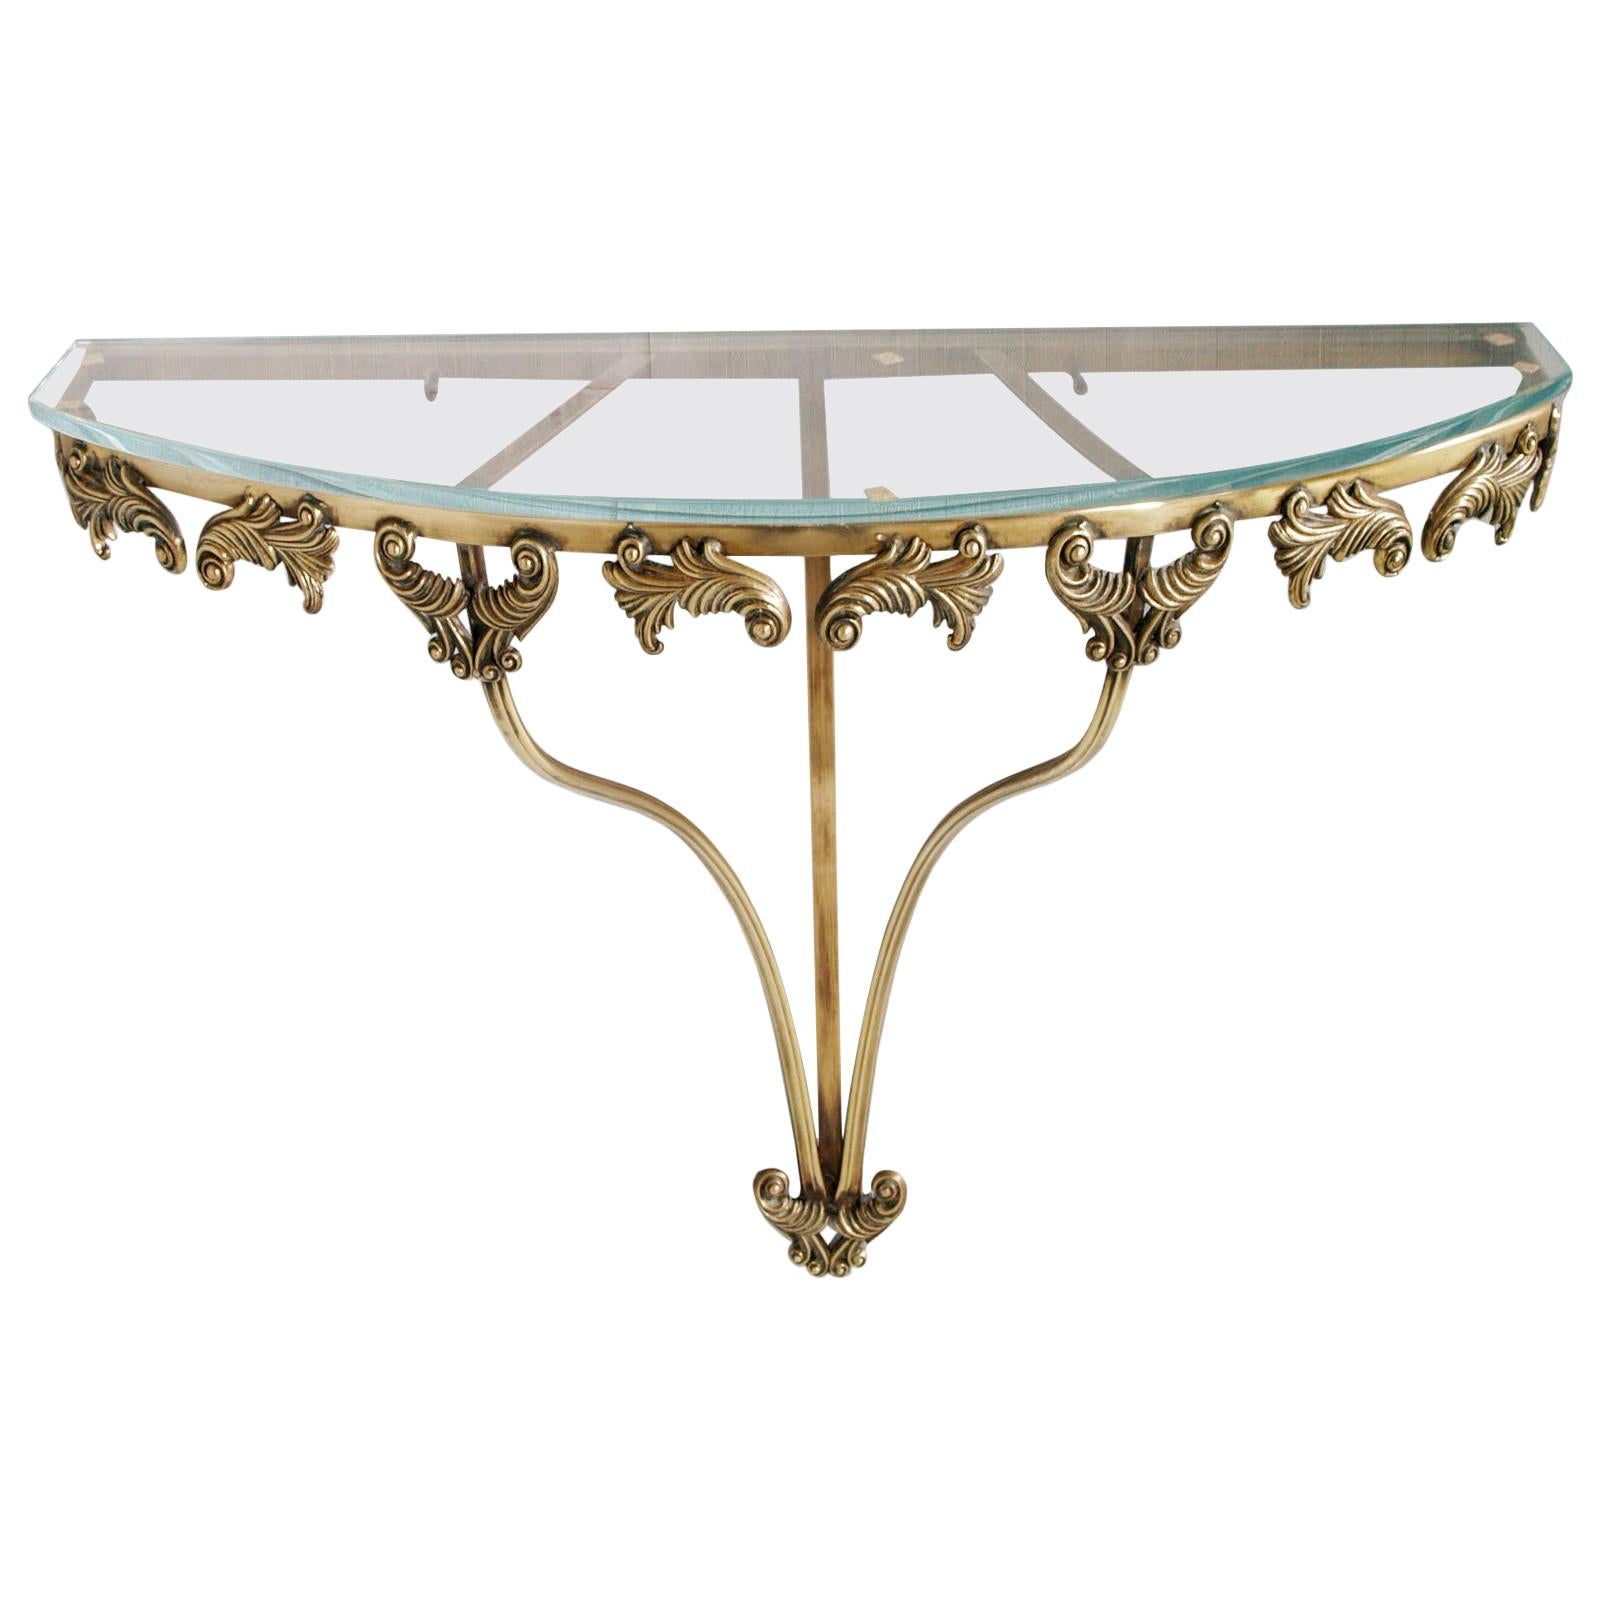 Mid-Century Modern Console, Gilt Bronze and Cristal, Attributed to Colli Torino For Sale